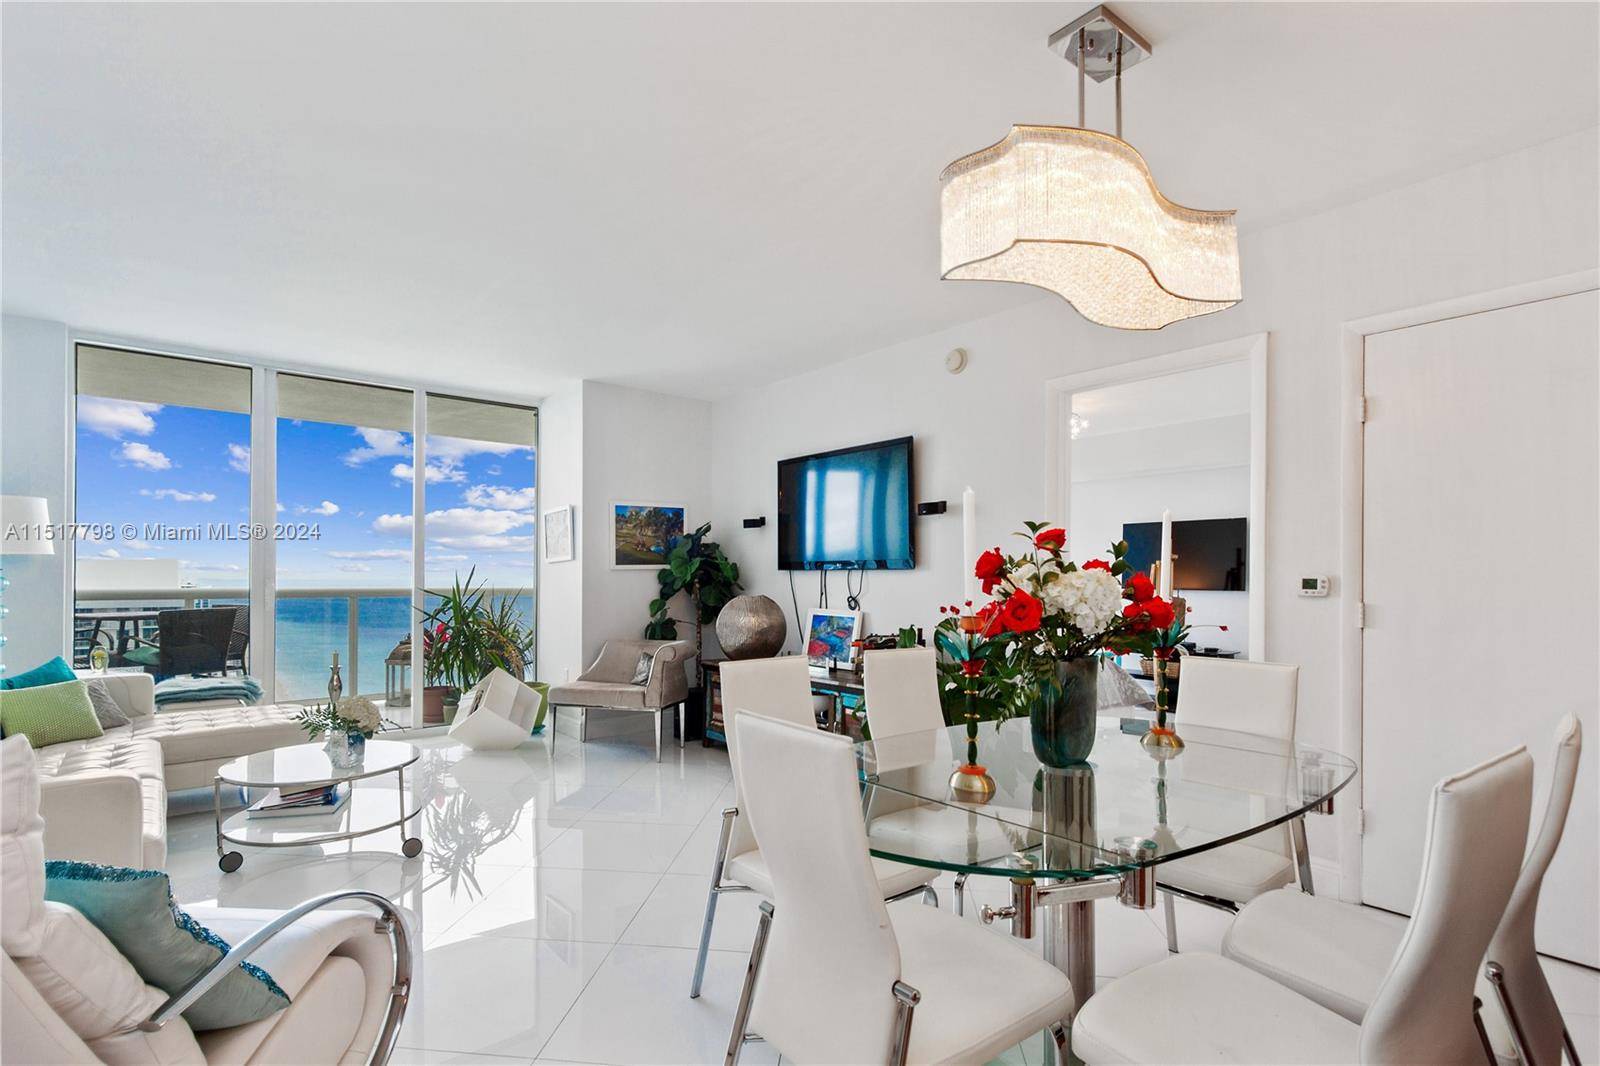 Experience breathtaking ocean views from this two bedroom lower penthouse with 1, 337 sq.